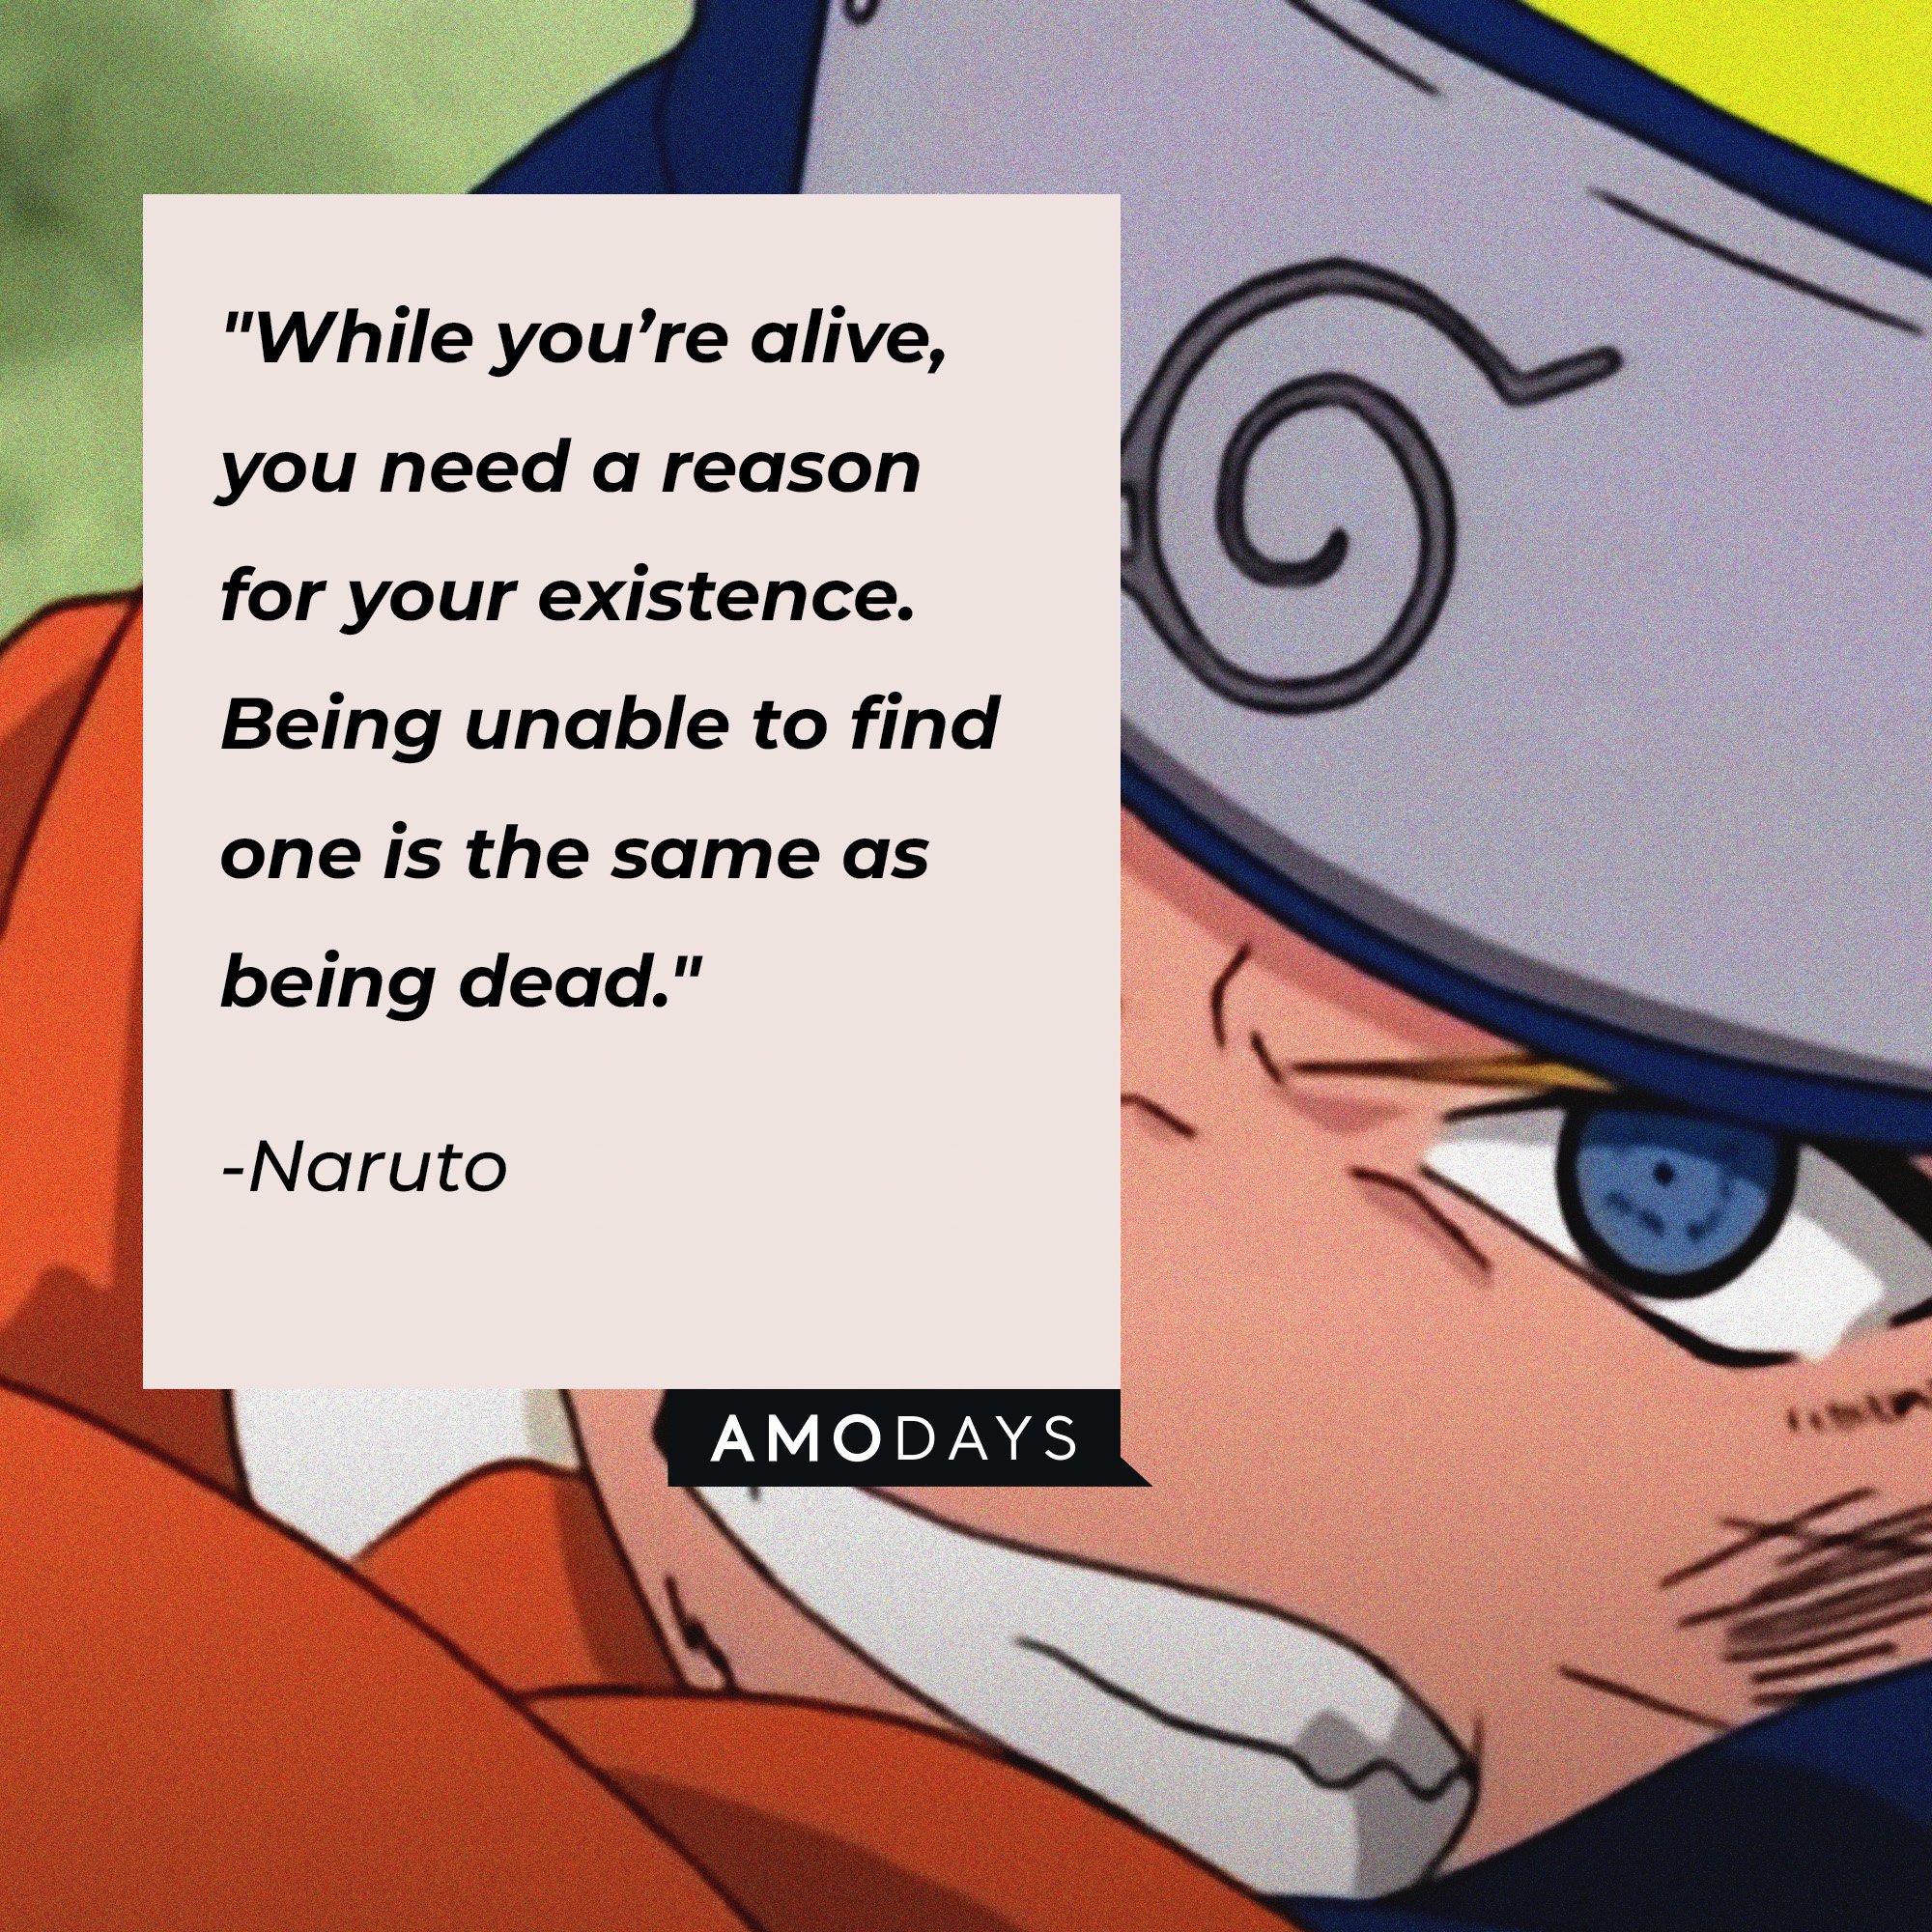 Naruto's quote: "While you’re alive, you need a reason for your existence. Being unable to find one is the same as being dead." | Image: AmoDays